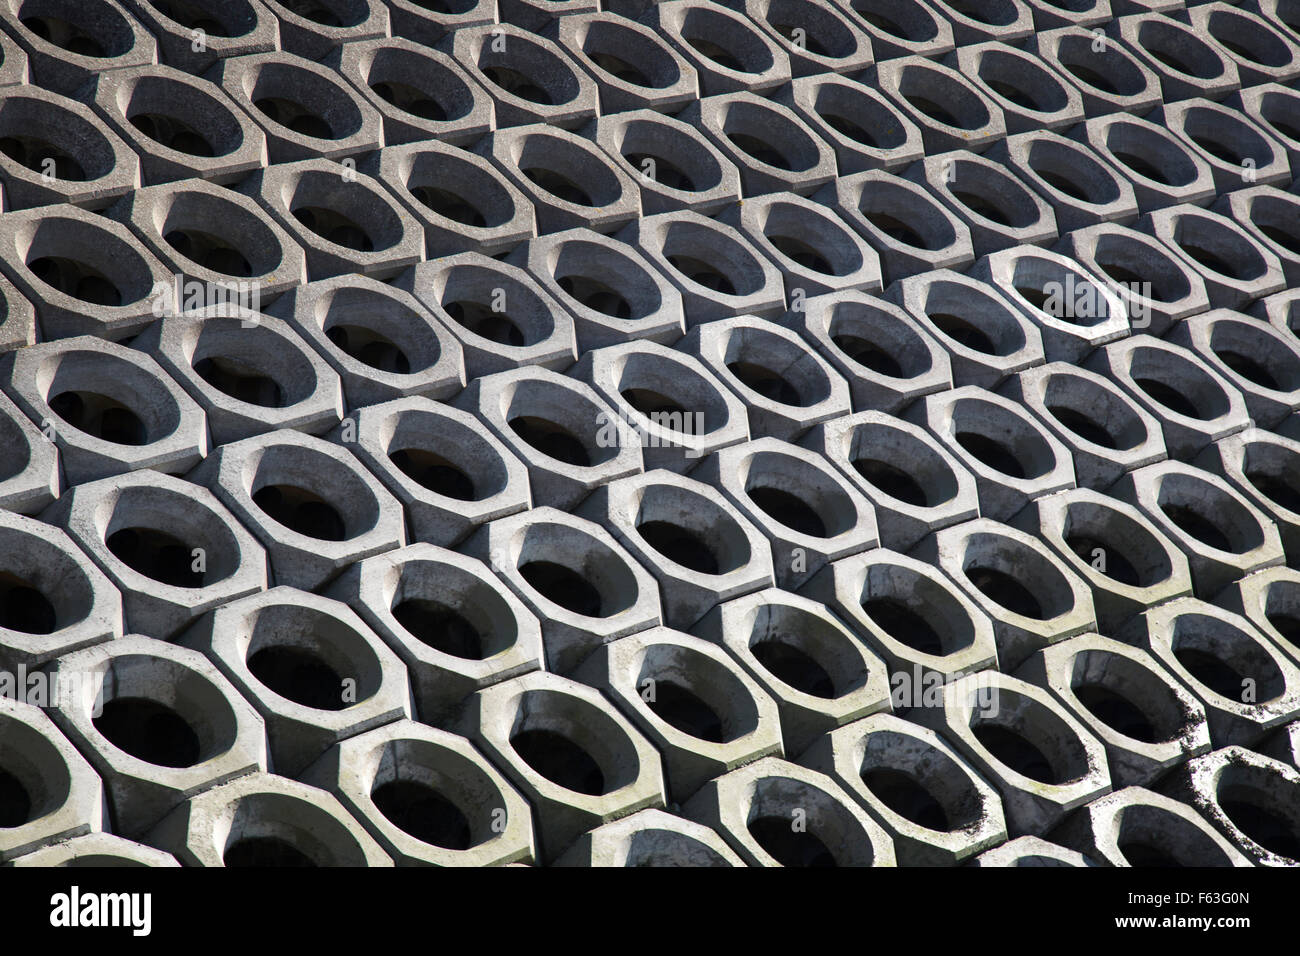 Rows of Polygon shaped objects. Stock Photo